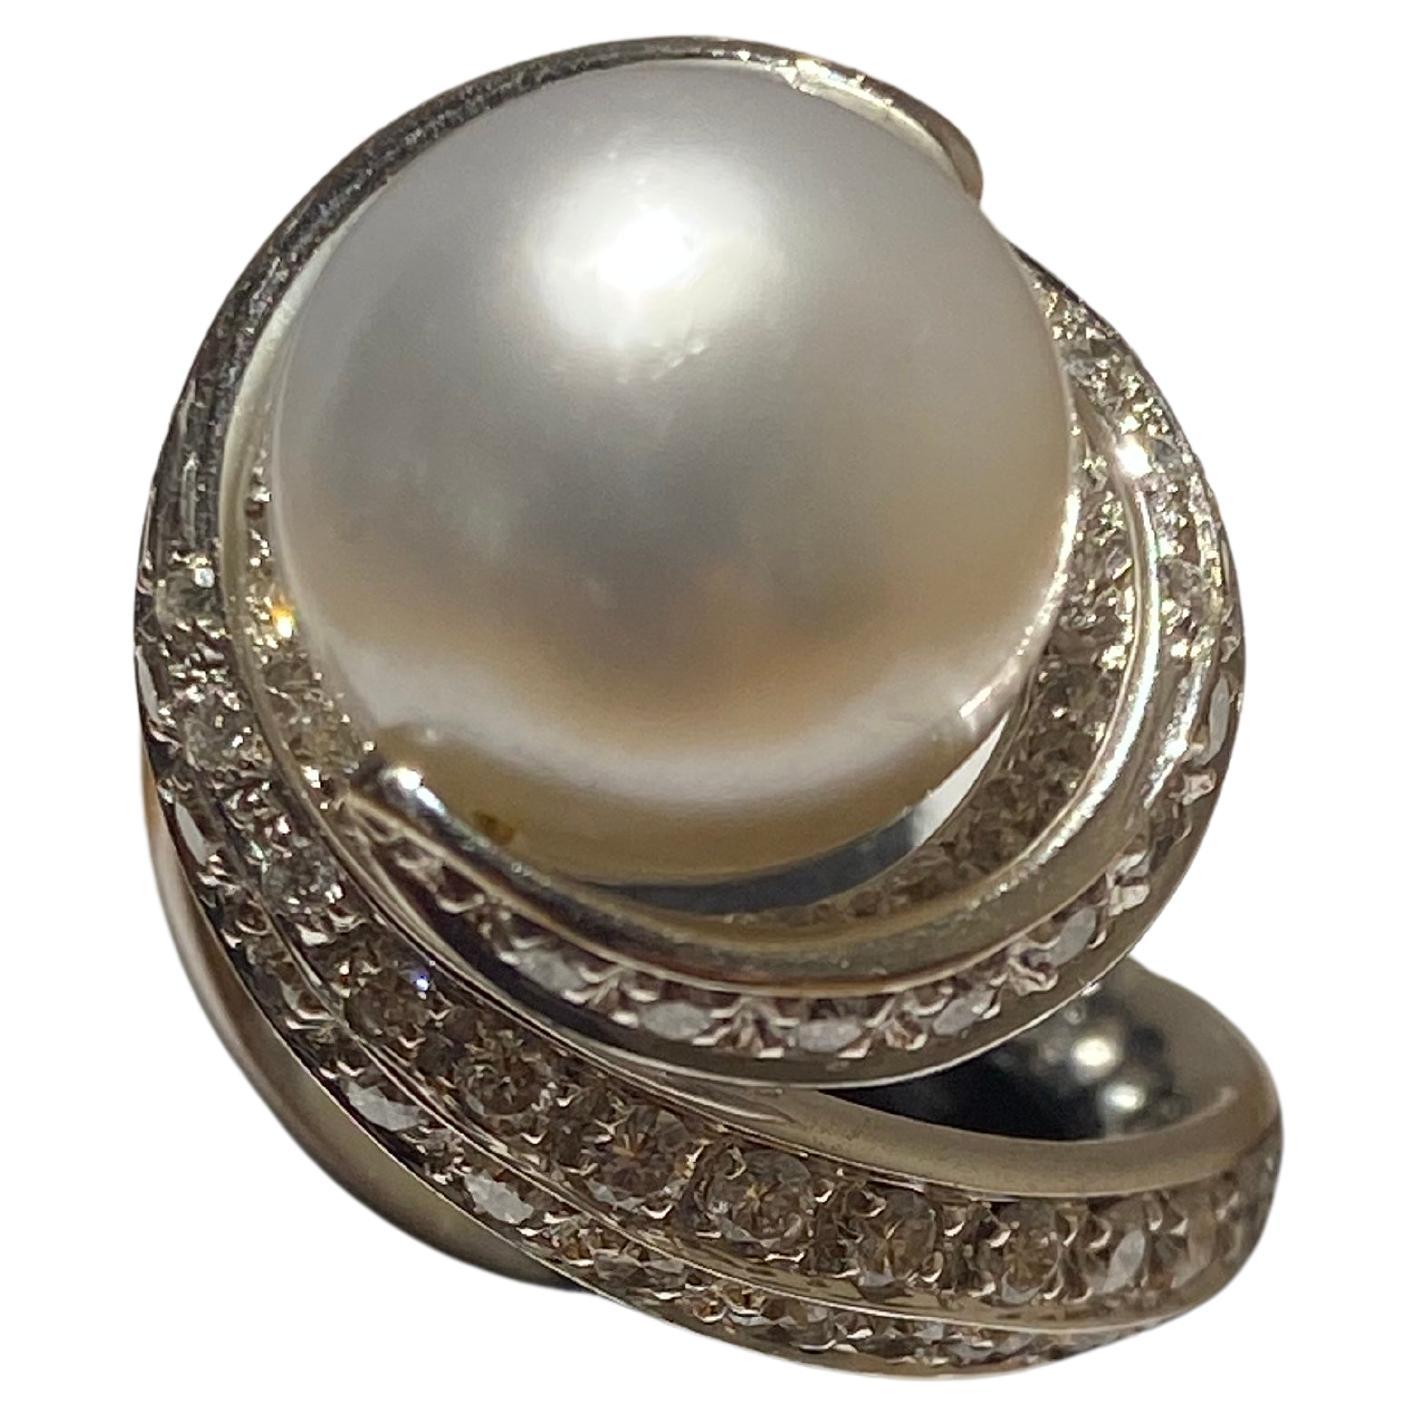 This ring elegantly embodies the dynamic essence and strength of a spiral in its design. 
This gesture raises a perfect South-Sea pearl on your fingers and illuminates them with diamonds.
Meticulously crafted in 18K white gold, this exquisite ring